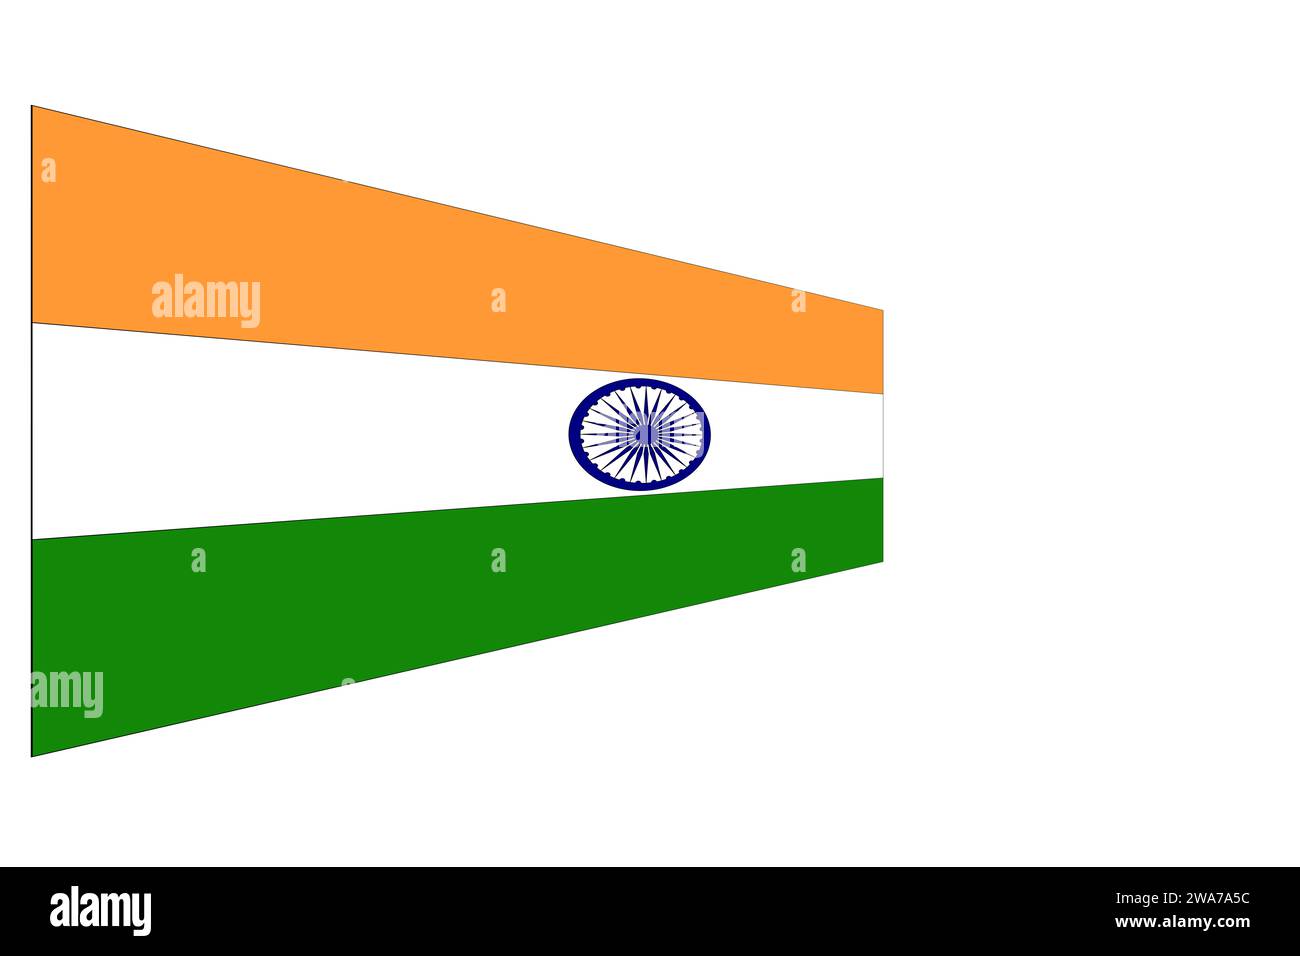 India, national flag of India. official colors and correct proportions. Stock Photo